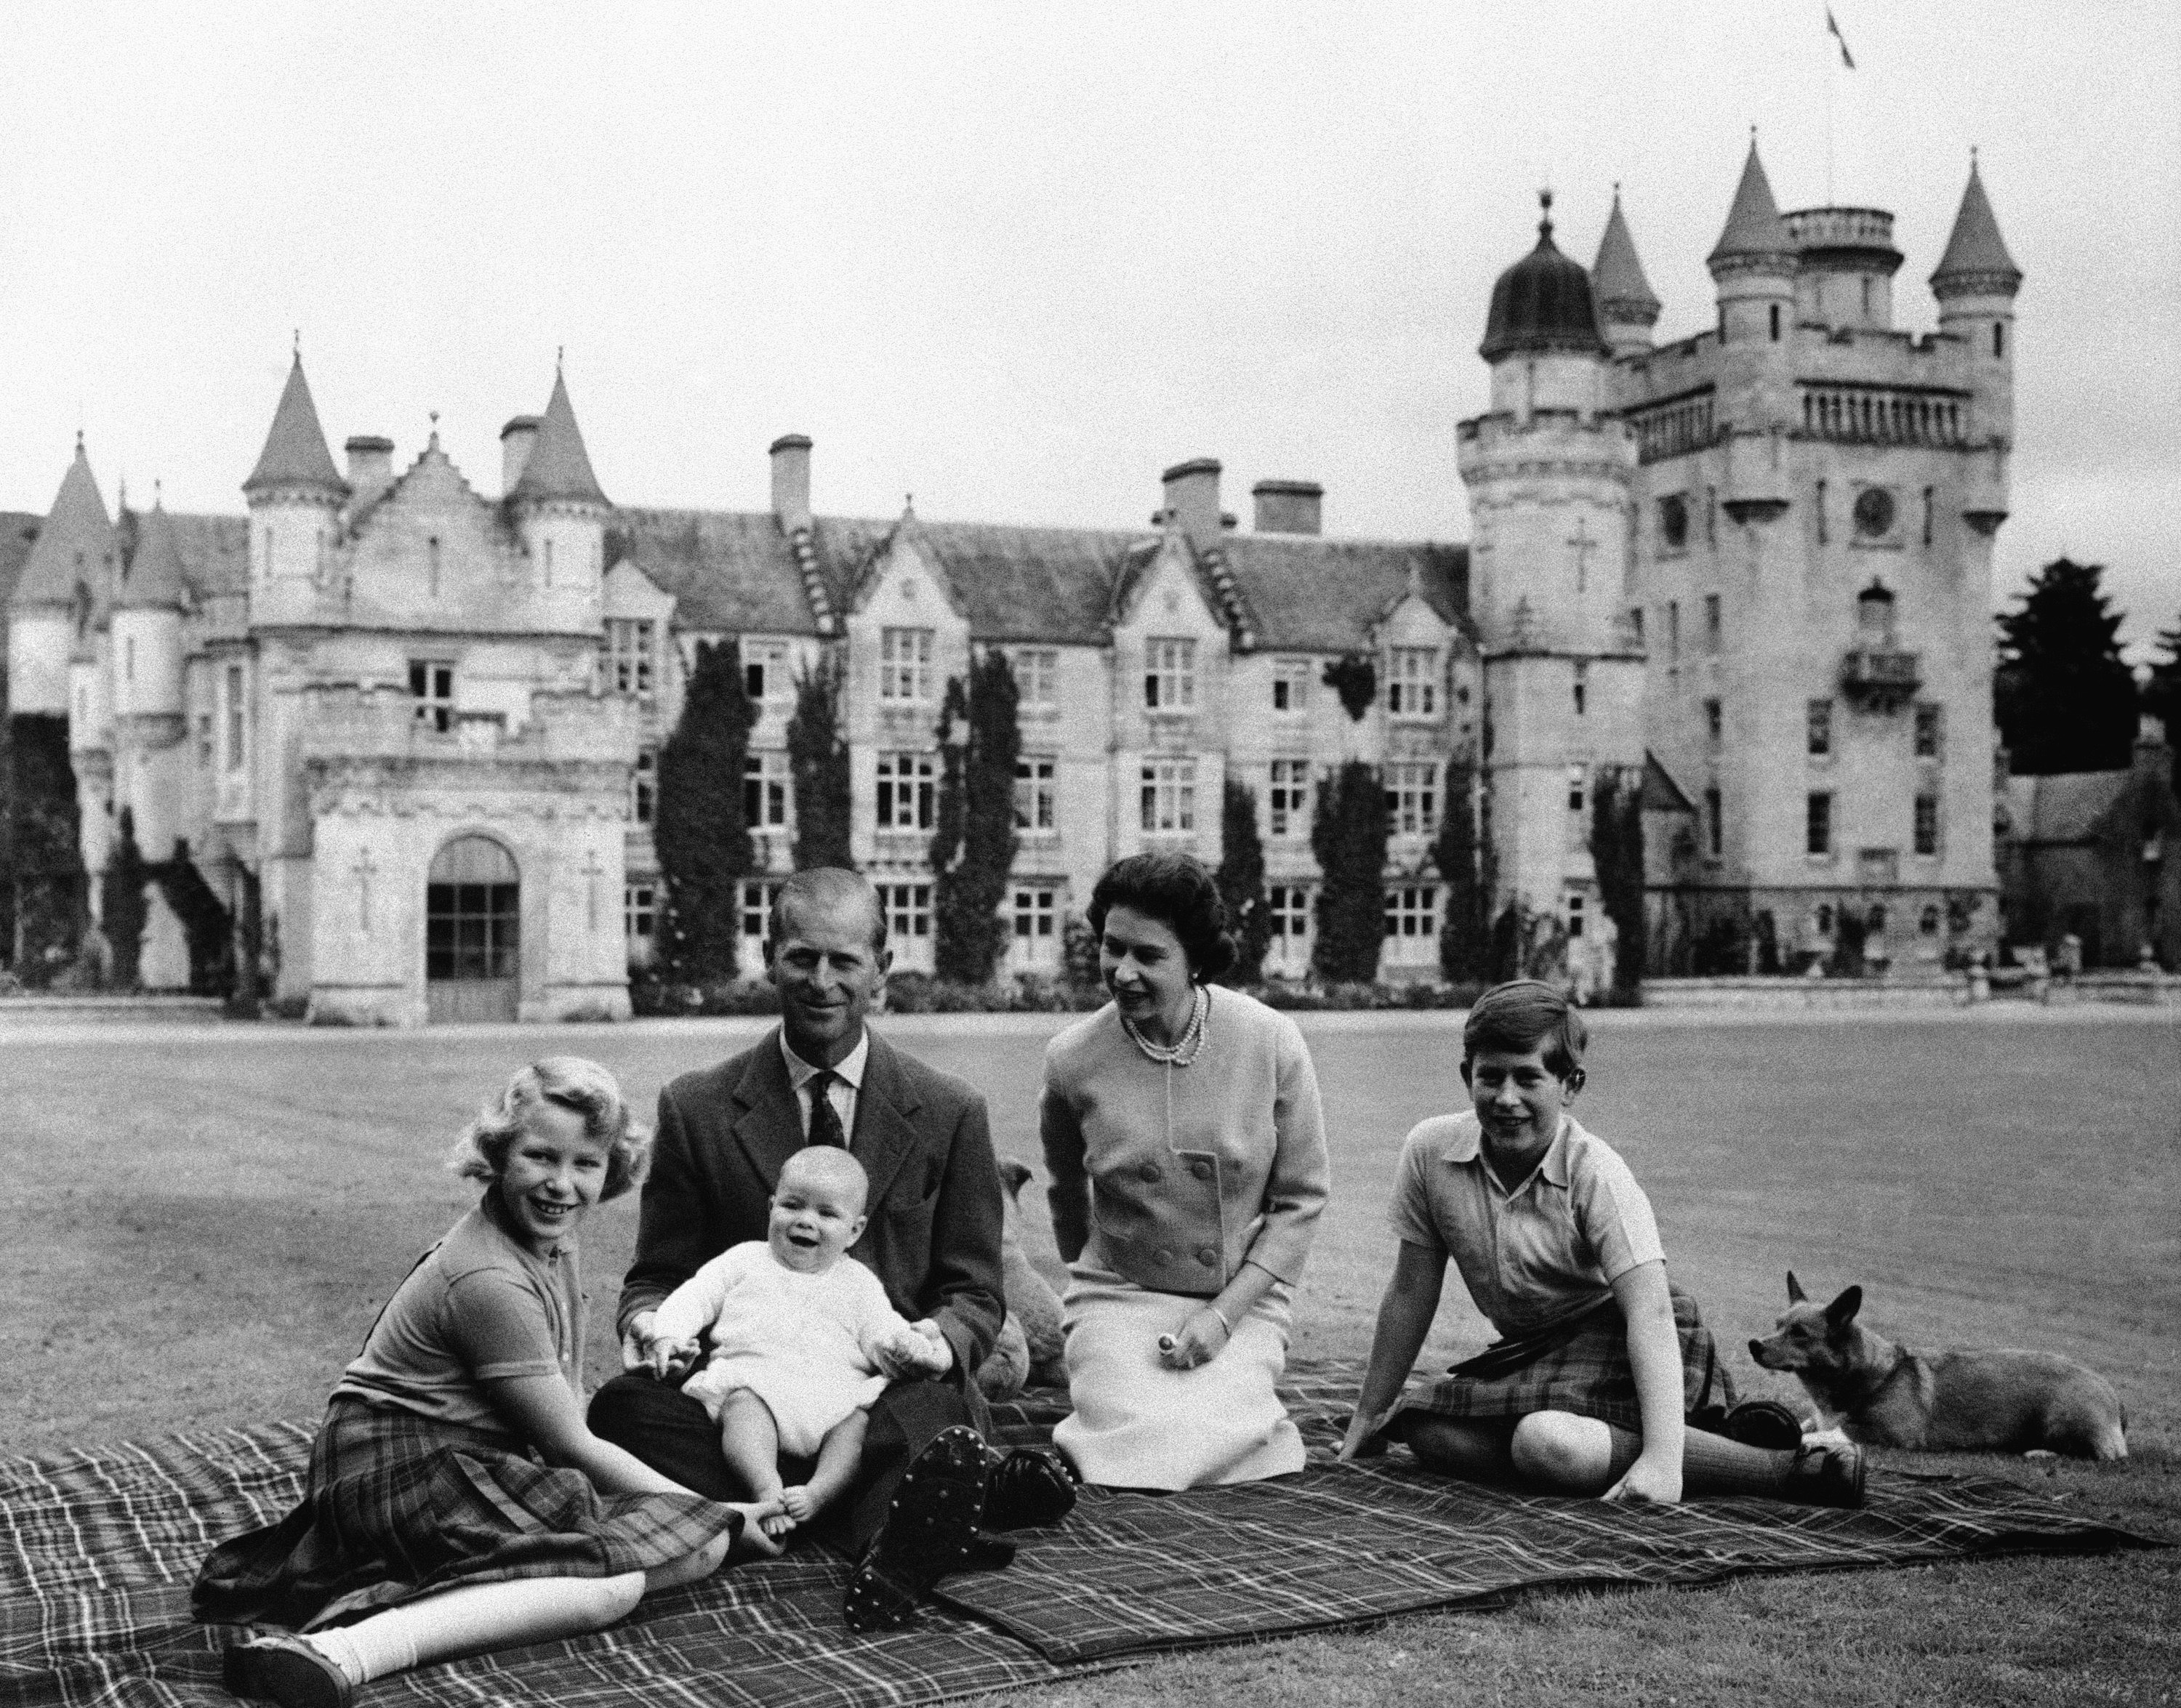 Queen Elizabeth, Prince Philip and their children, Prince Charles (right), Princess Anne and Prince Andrew, pose for a photo on the lawn of Balmoral Castle in Scotland, in 1960.